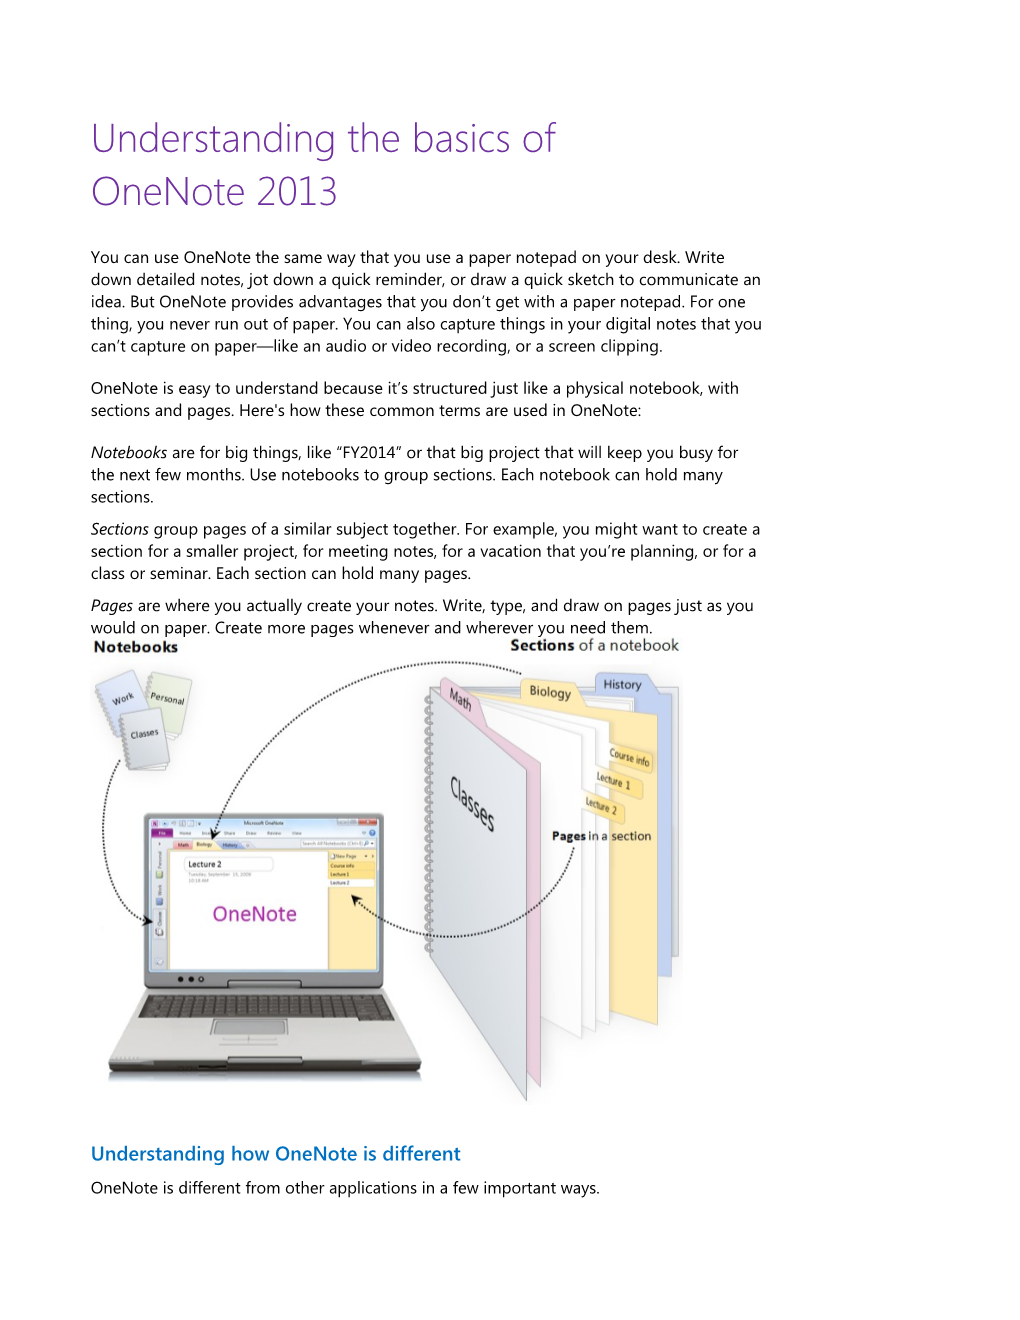 Work Smart: Go Paperless with Onenote 2013